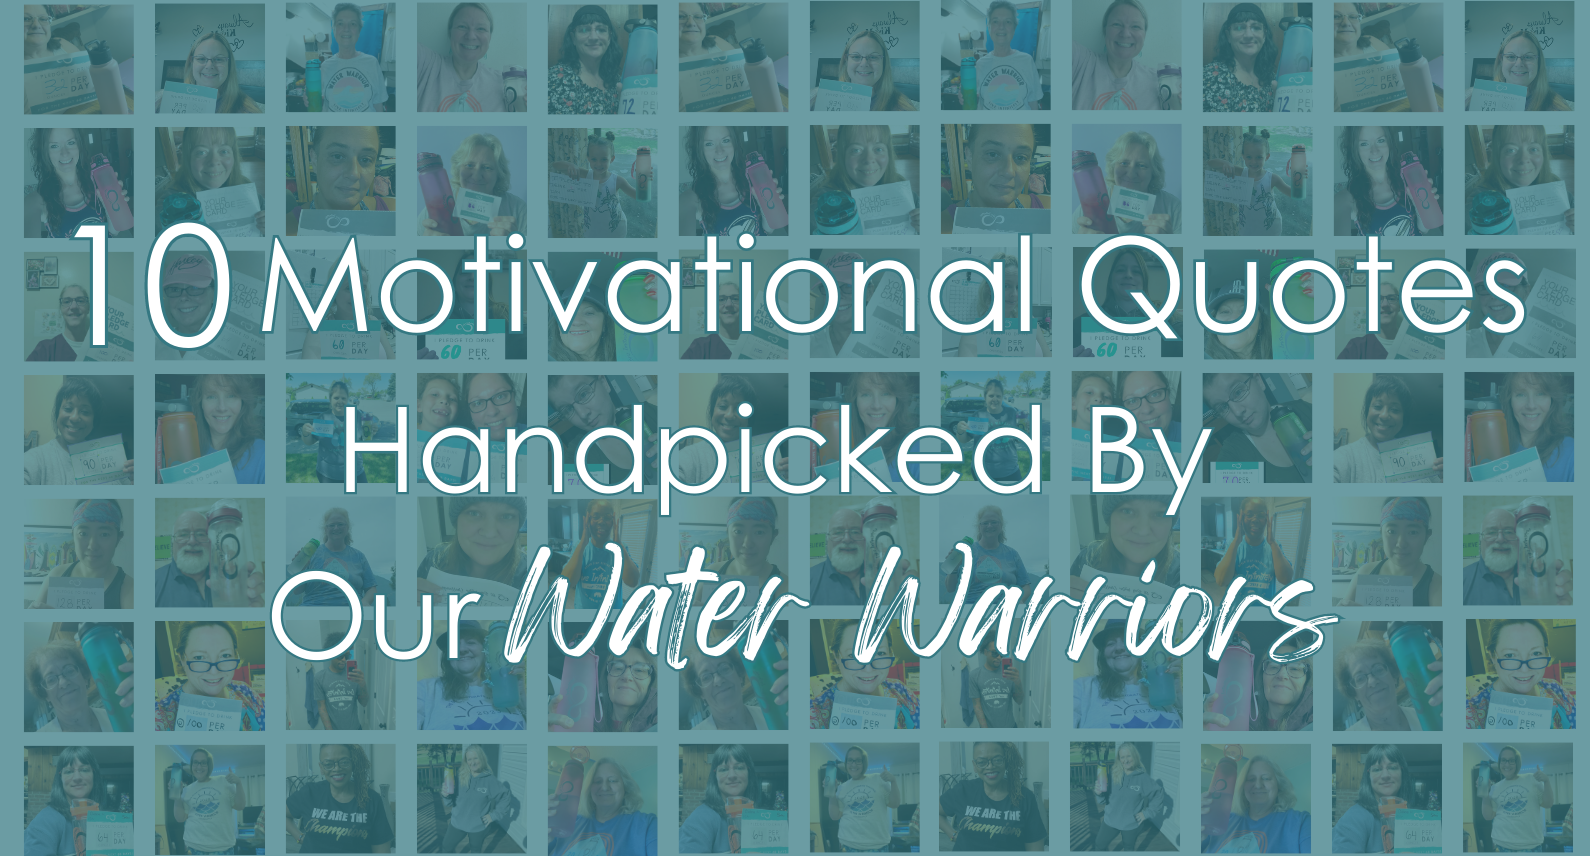 10 Motivational Quotes Handpicked By Our Water Warriors